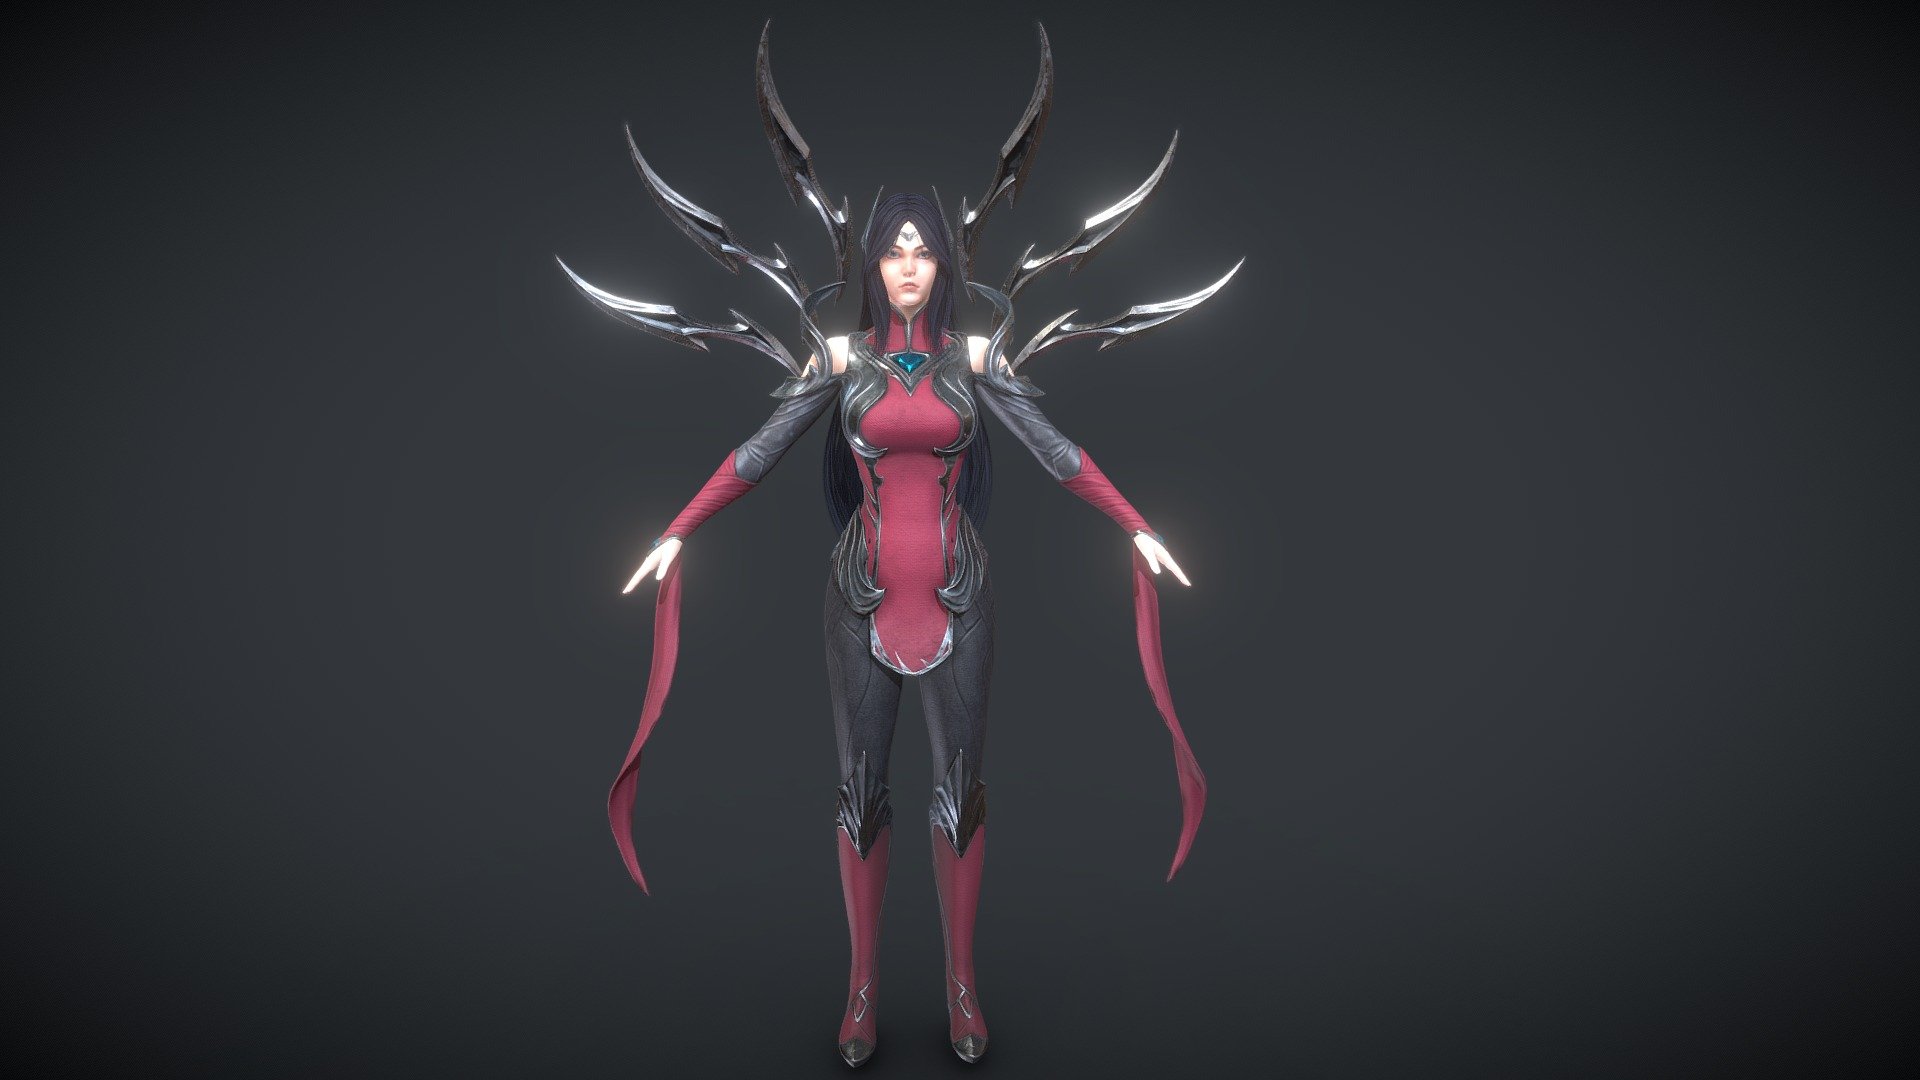 Marvelous Designer
Maya
Zbrush
Xnormal
Subtance Painter
Toolbag



Use UE4 type mapping




BaseColor

Normal

ORM(AO,Roughness,Metal)

Emissive
 ..........



Hair Maps in UE4：

ALpha

Depth

Diffuse

ID

Root



Please download the model assets in the Additional file，thanks 3d model